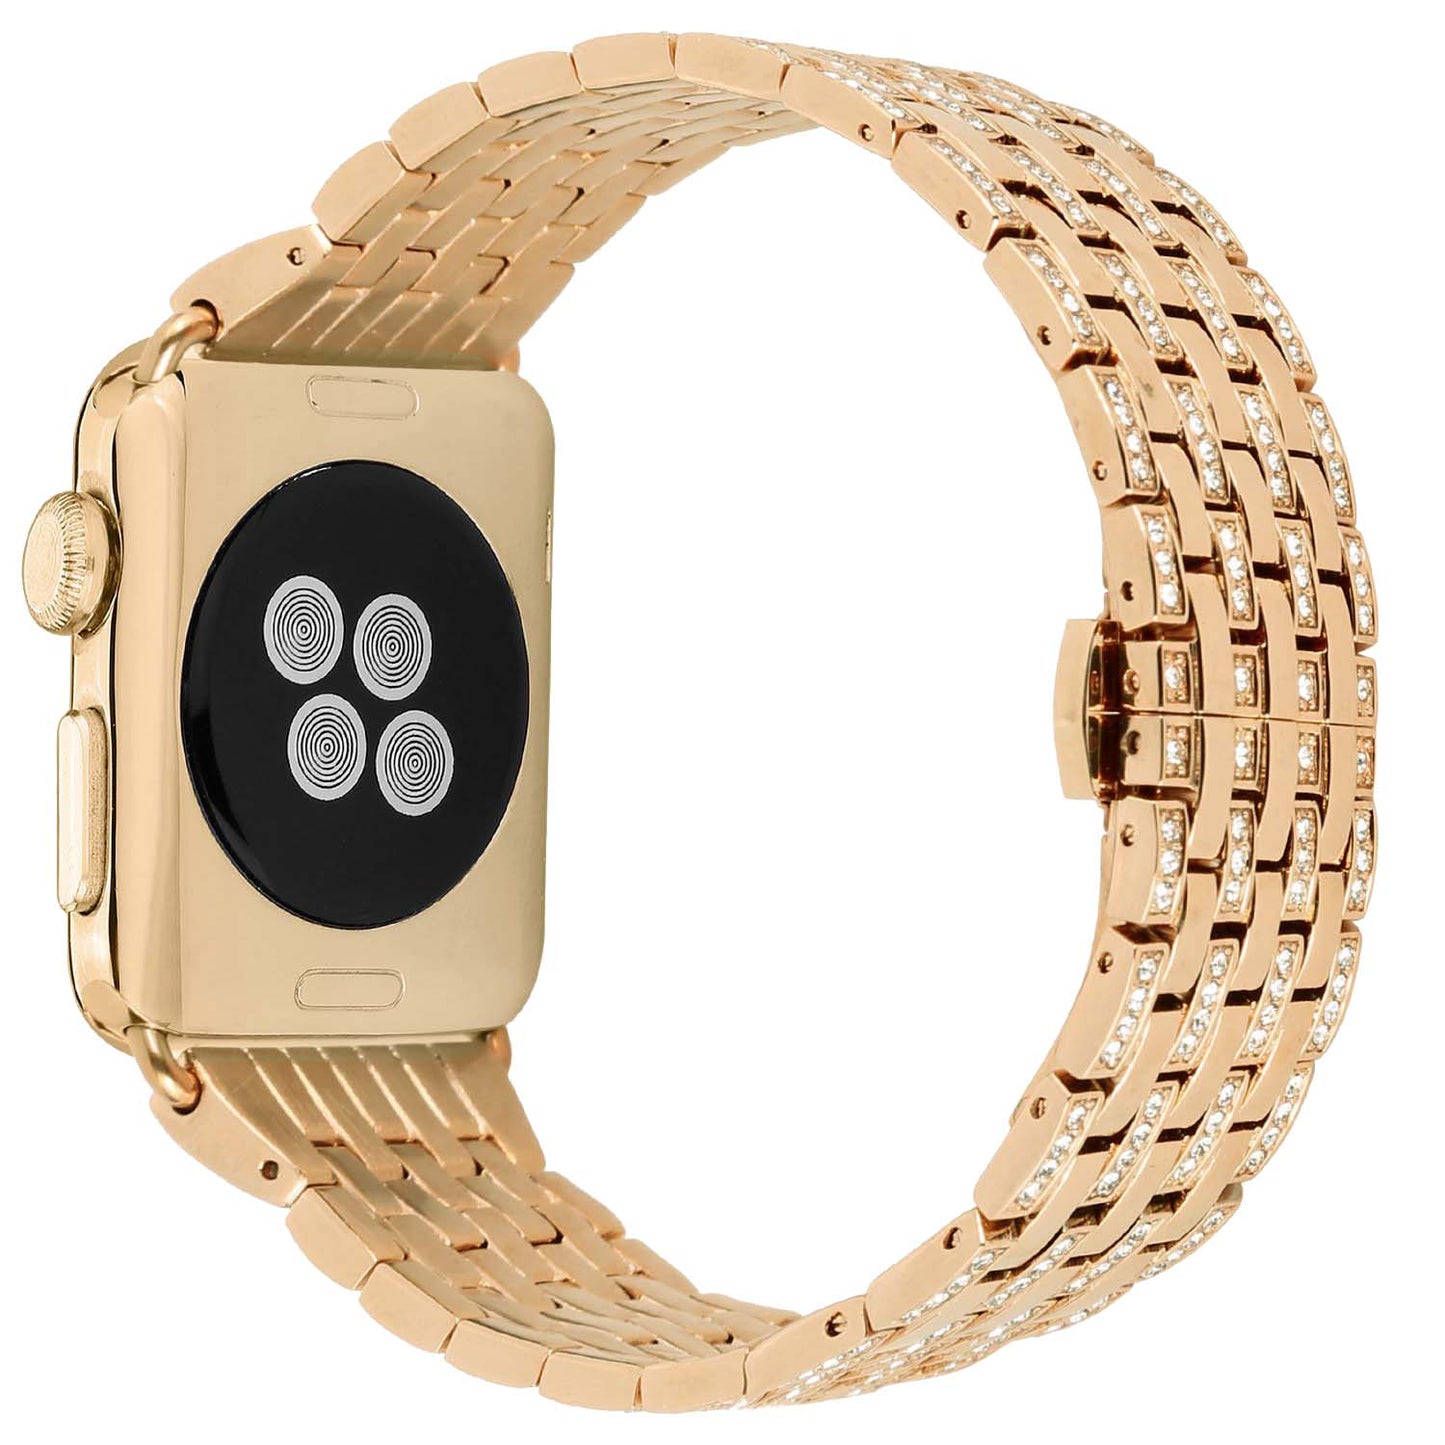 Rhinestone Bracelet Replacement Band for Apple Watch